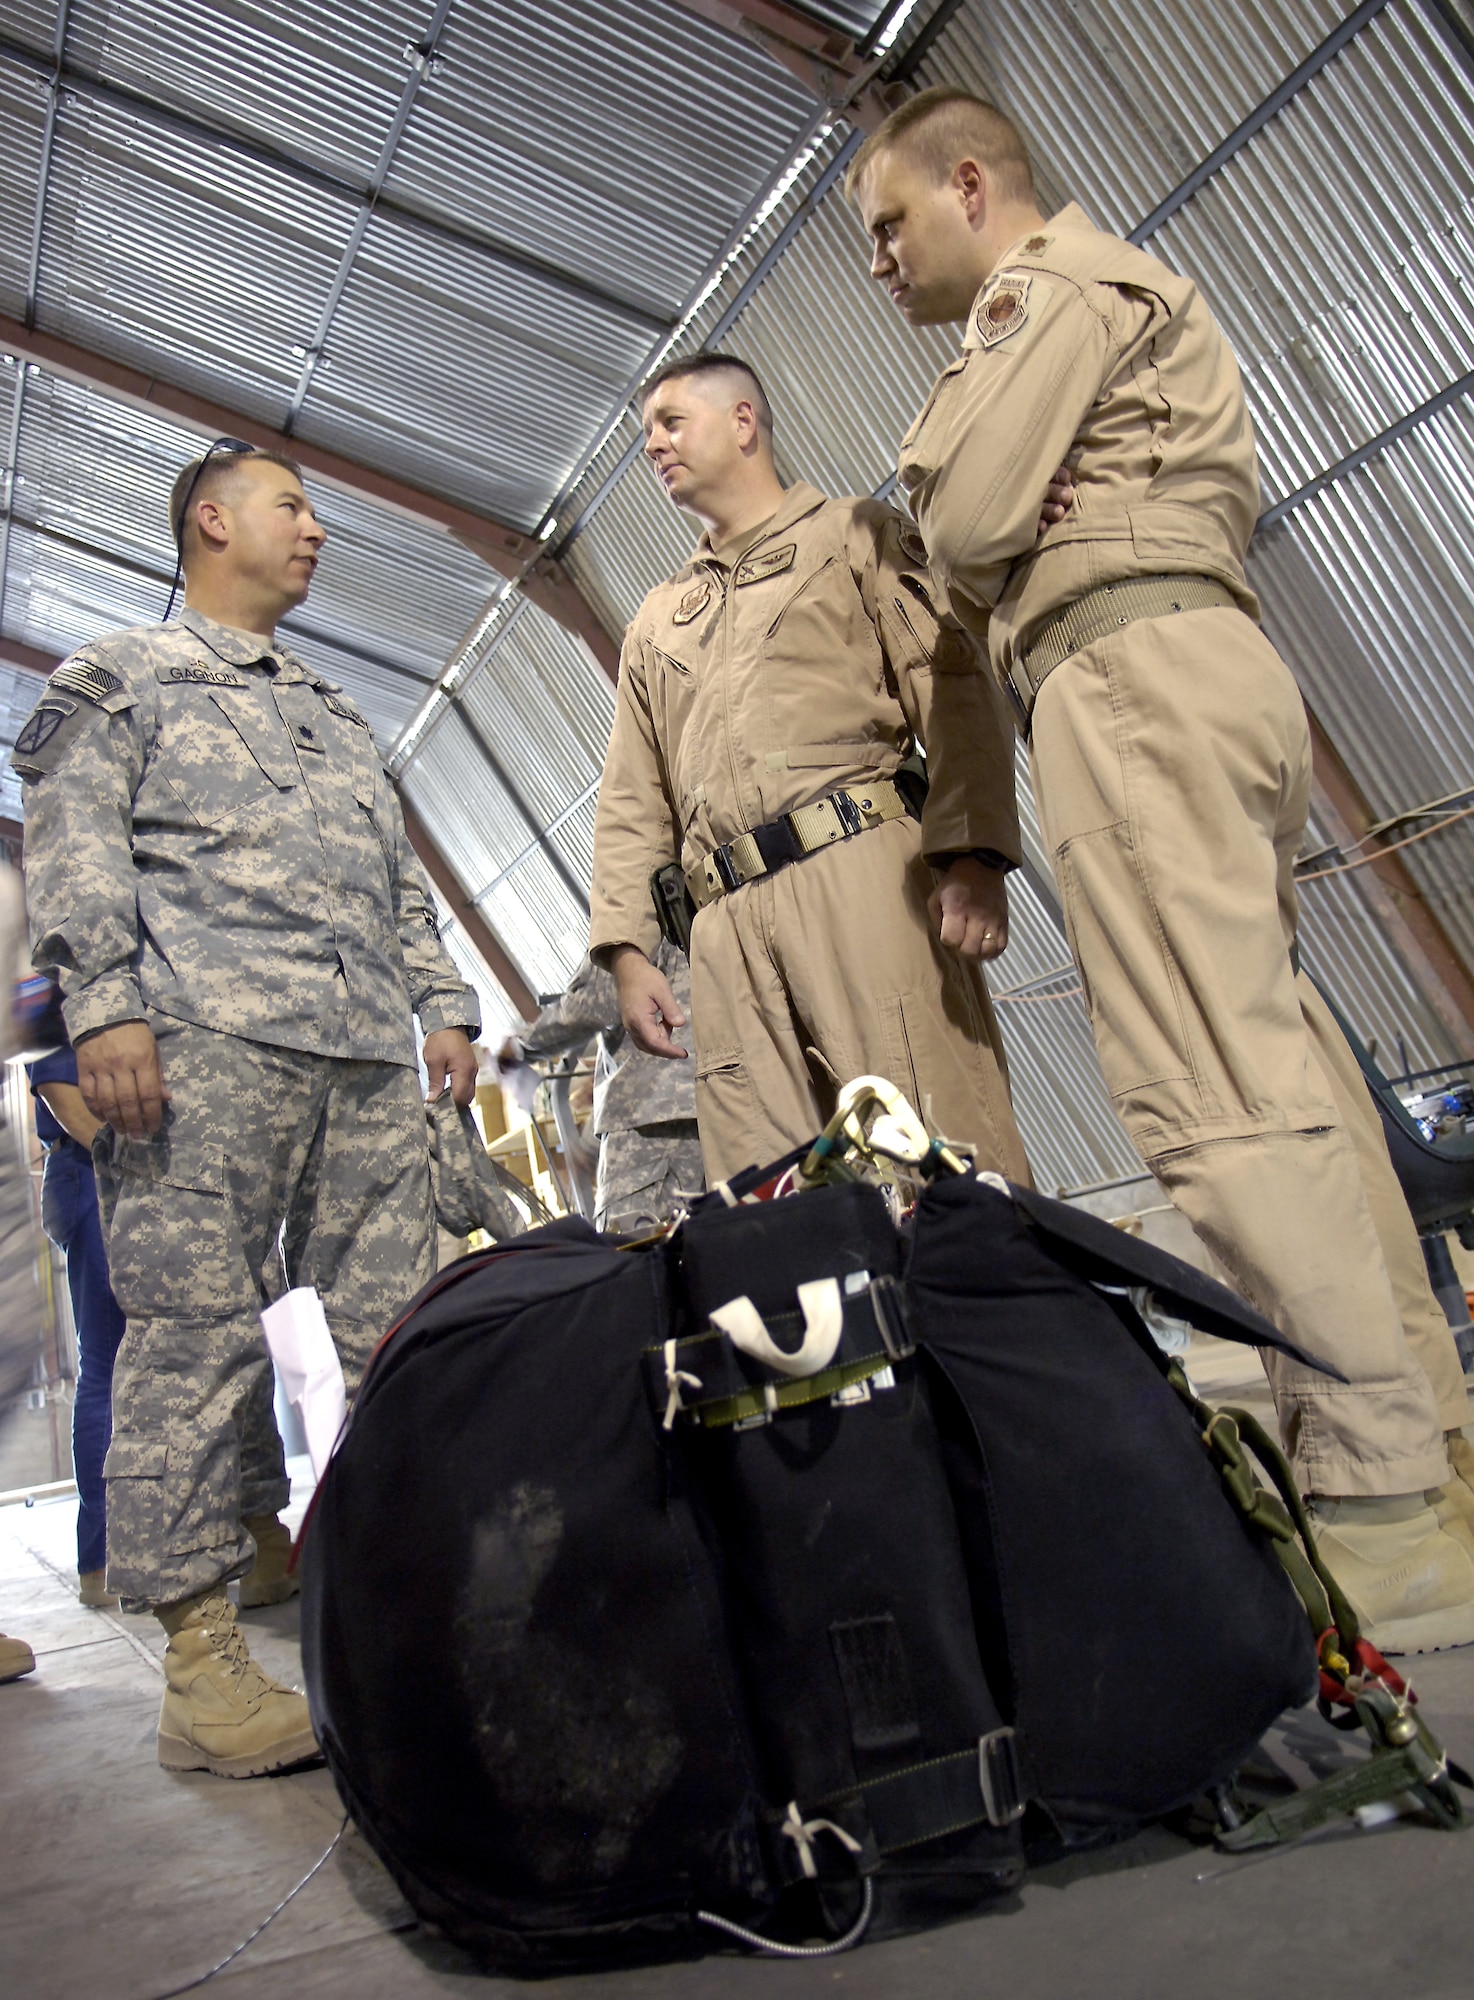 (From left) Army Lt. Col. Robert Gagnon, Maj. Neil Richardson and Maj. Daniel DeVoe review procedures for testing the new Joint Precision Air Drop System in Afghanistan. The system is designed to deliver airdrop loads to troops on the ground with more precision than the normal airdrop system. Colonel Gagnon is the deputy commander of the 10th Sustainment Brigade. Major DeVoe is the command tactician at the Air Mobility Warfare Center. Major Richardson is the chief of combat programs and policy branch at Air Mobility Command. (U.S. Air Force photo/Senior Airman Brian Ferguson) 